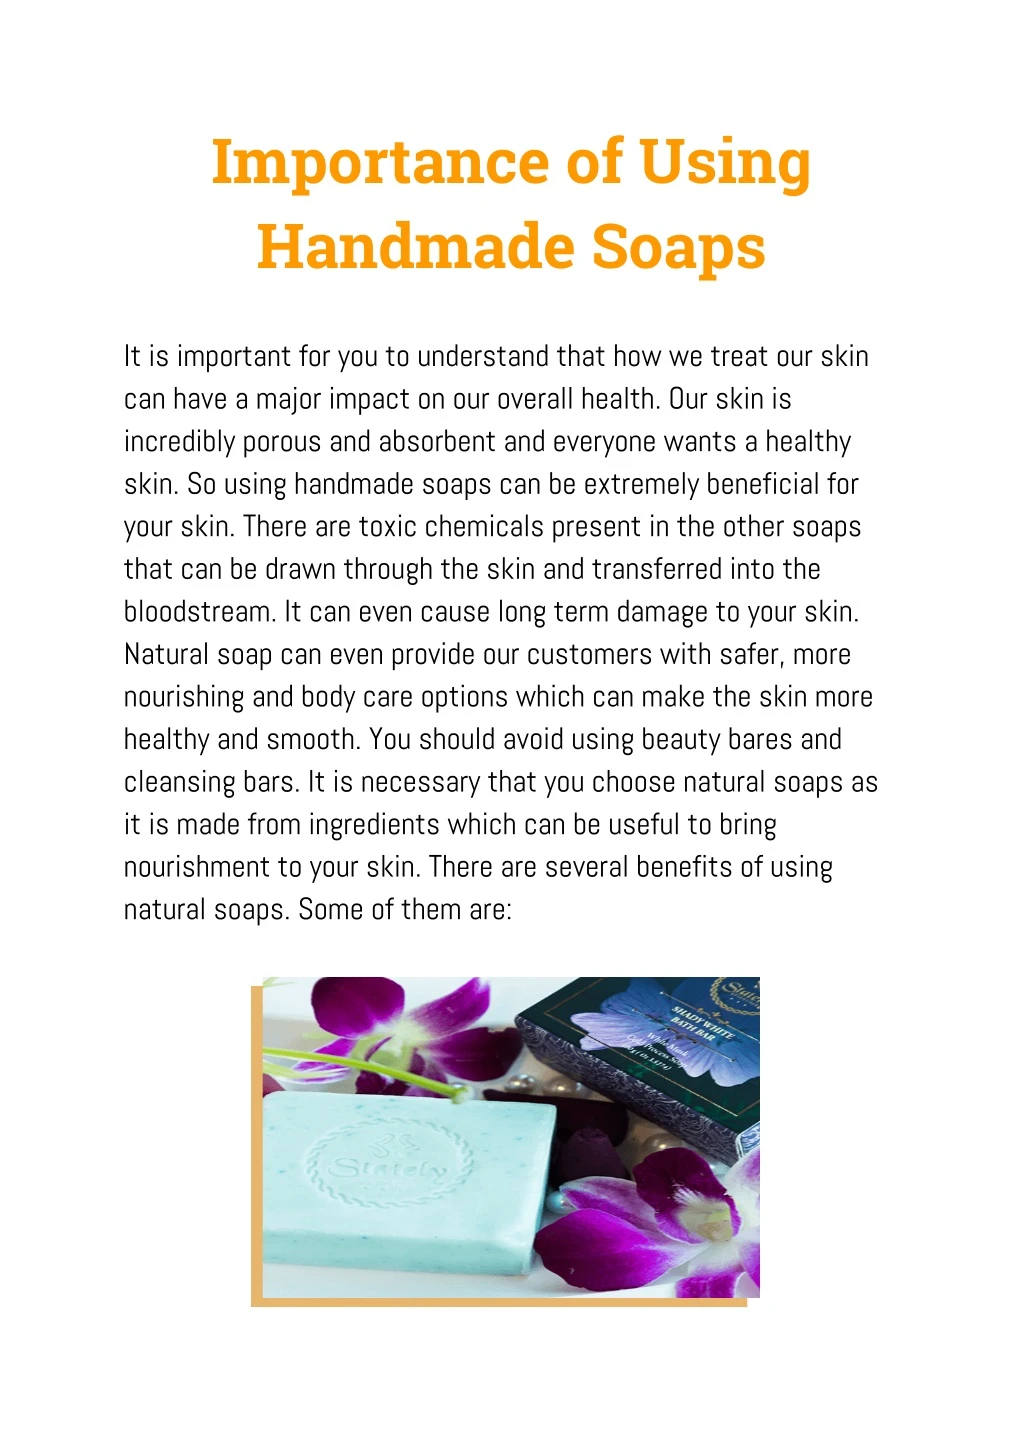 importance of using handmade soaps